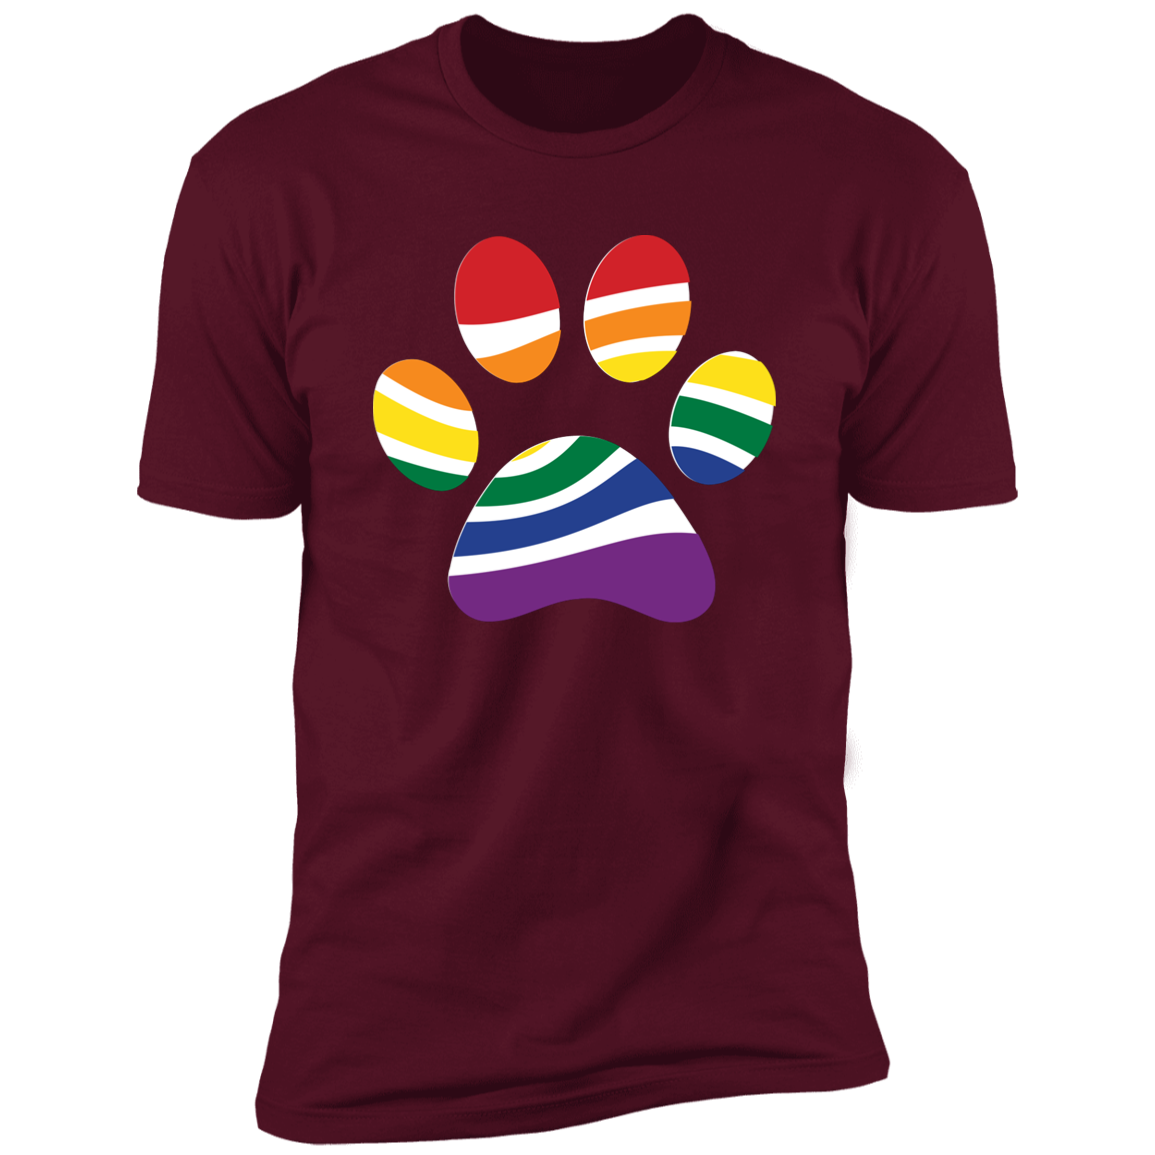 Pride Paw (Retro) Pride T-shirt, Paw Pride Dog Shirt for humans, in maroon